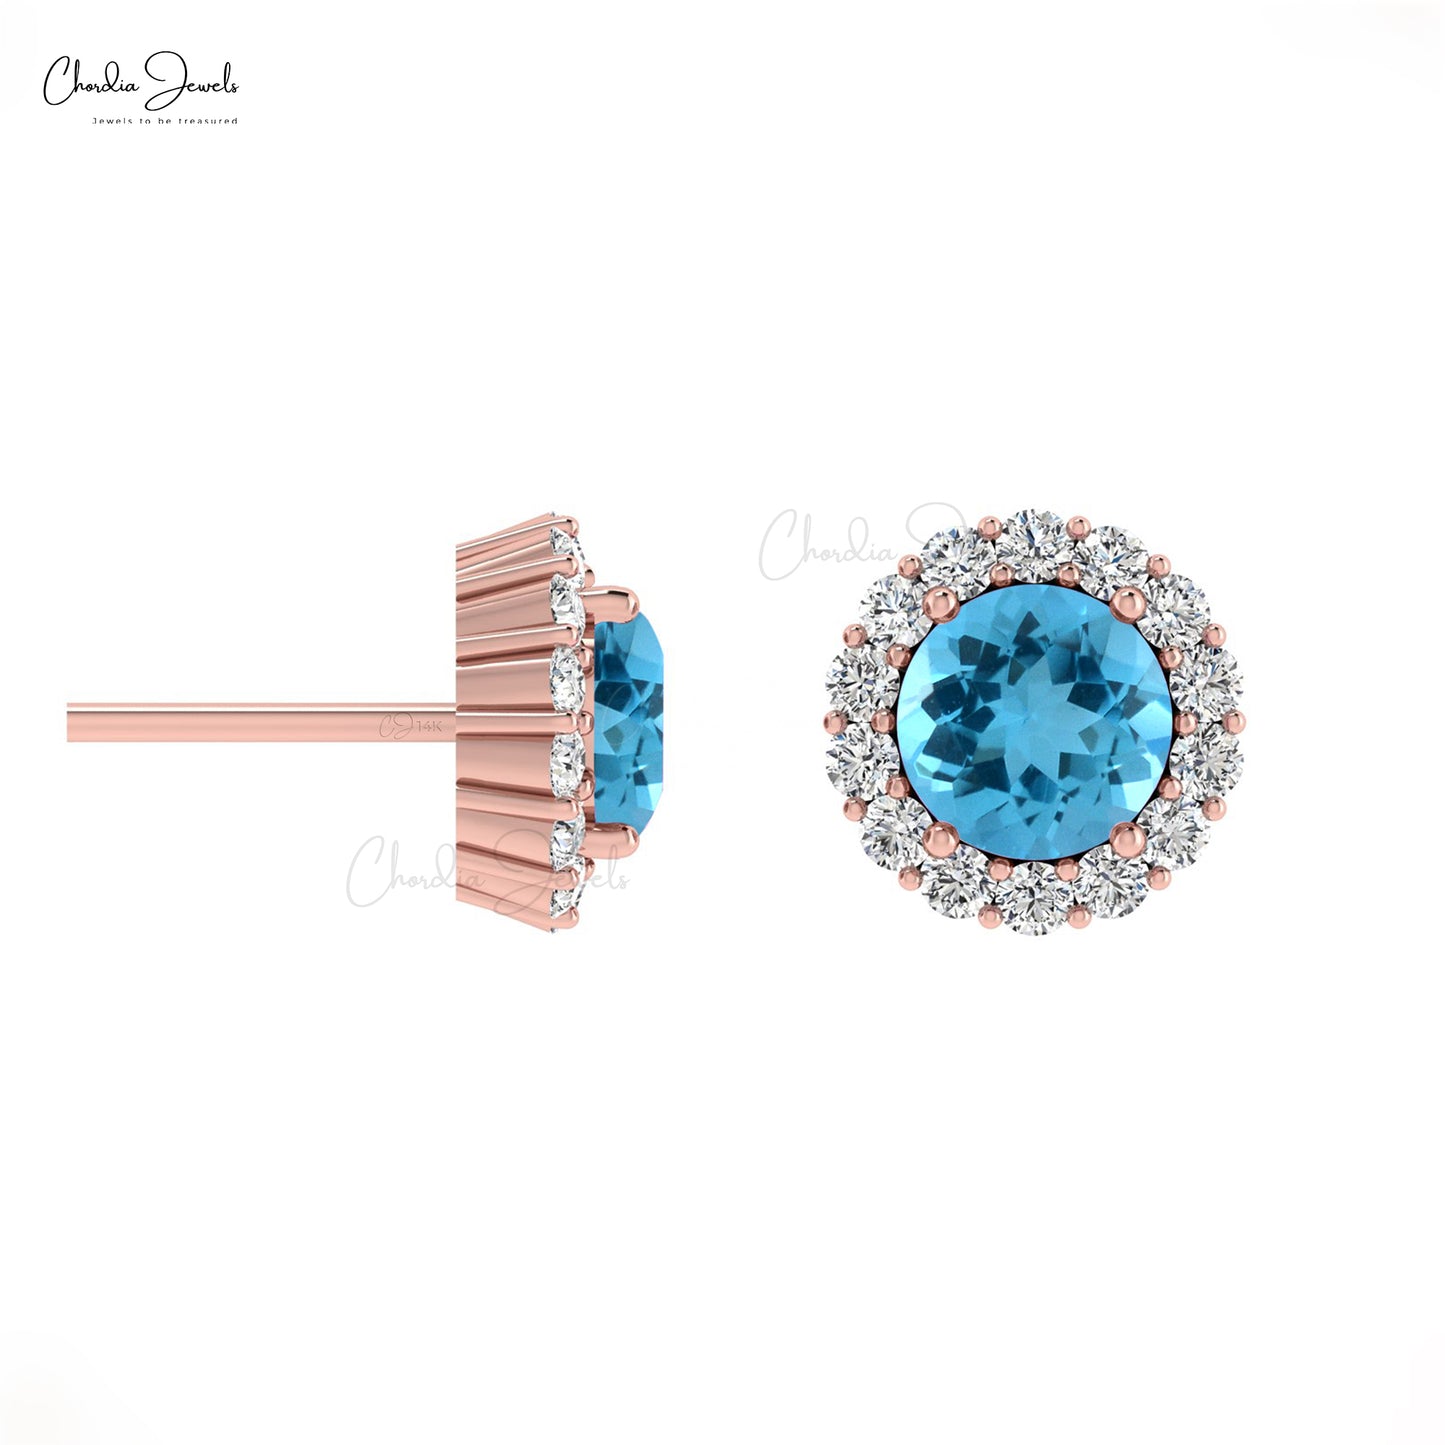 Load image into Gallery viewer, Unique 4mm Swiss Blue Topaz Halo Stud Earring For Women
